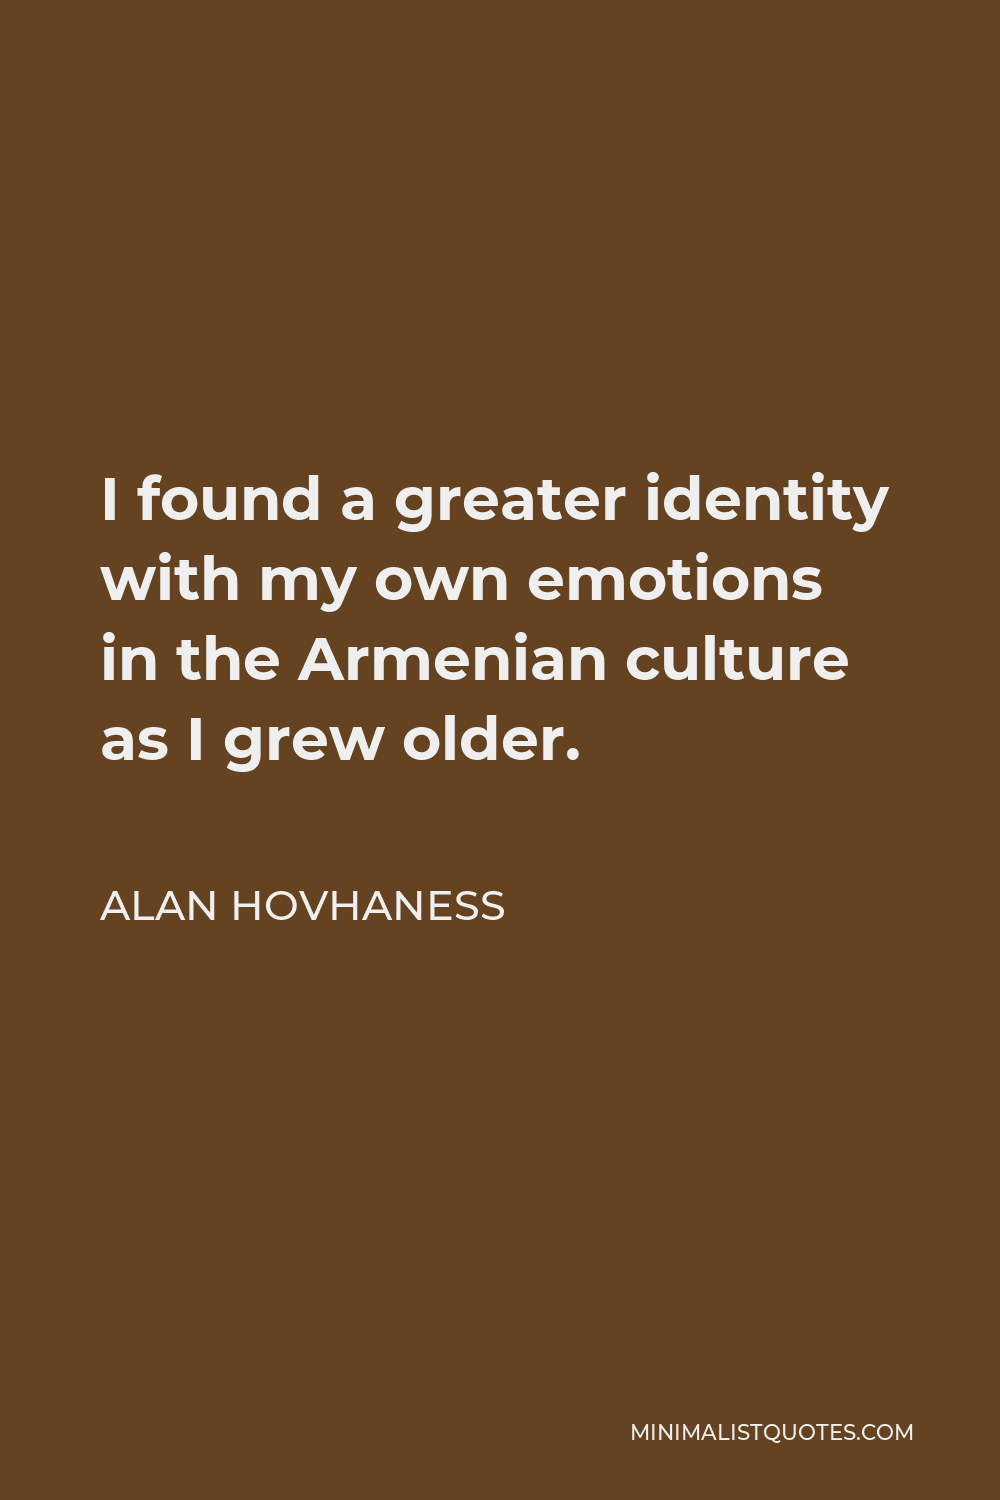 Alan Hovhaness Quote - I found a greater identity with my own emotions in the Armenian culture as I grew older.